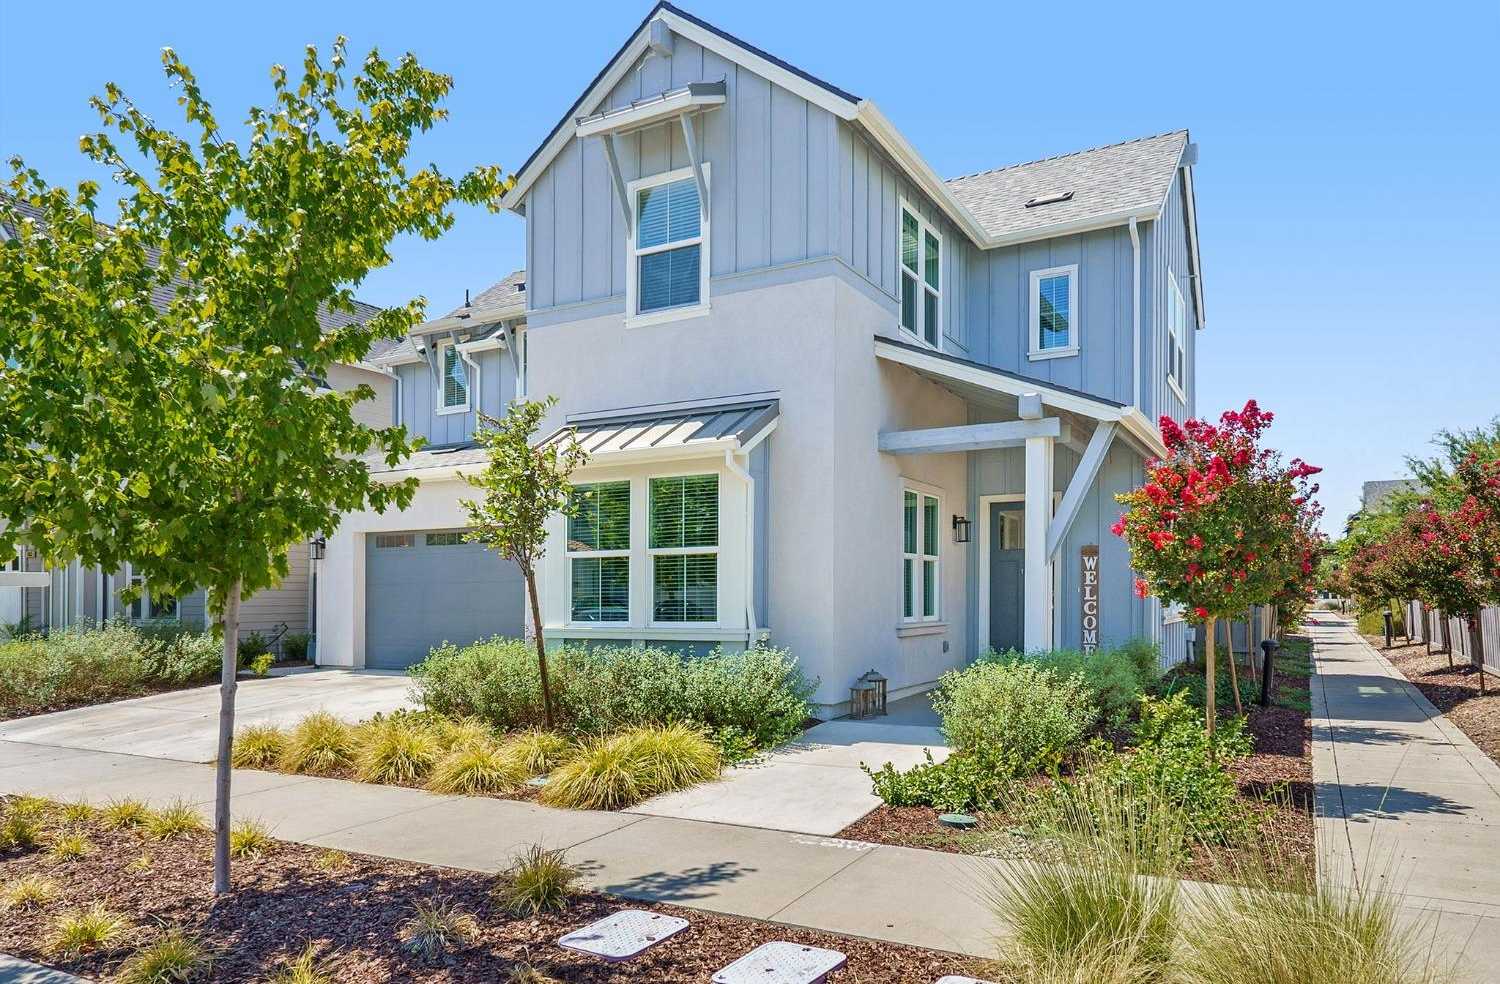 $1,598,000 - 5Br/4Ba -  for Sale in The Cannery, Davis